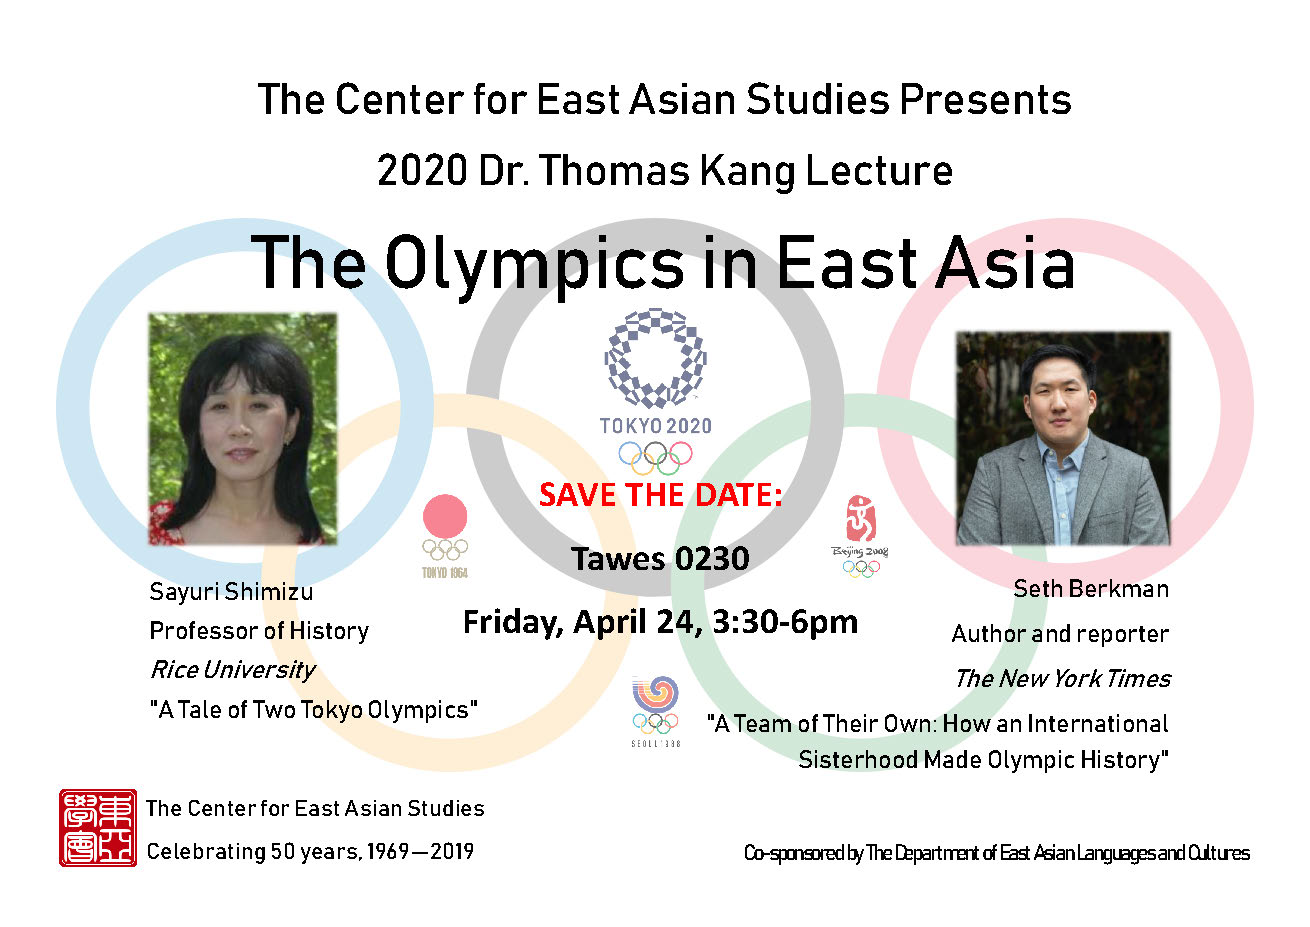 2020 Dr. Thomas Kang Lecture: The Olympics in East Asia